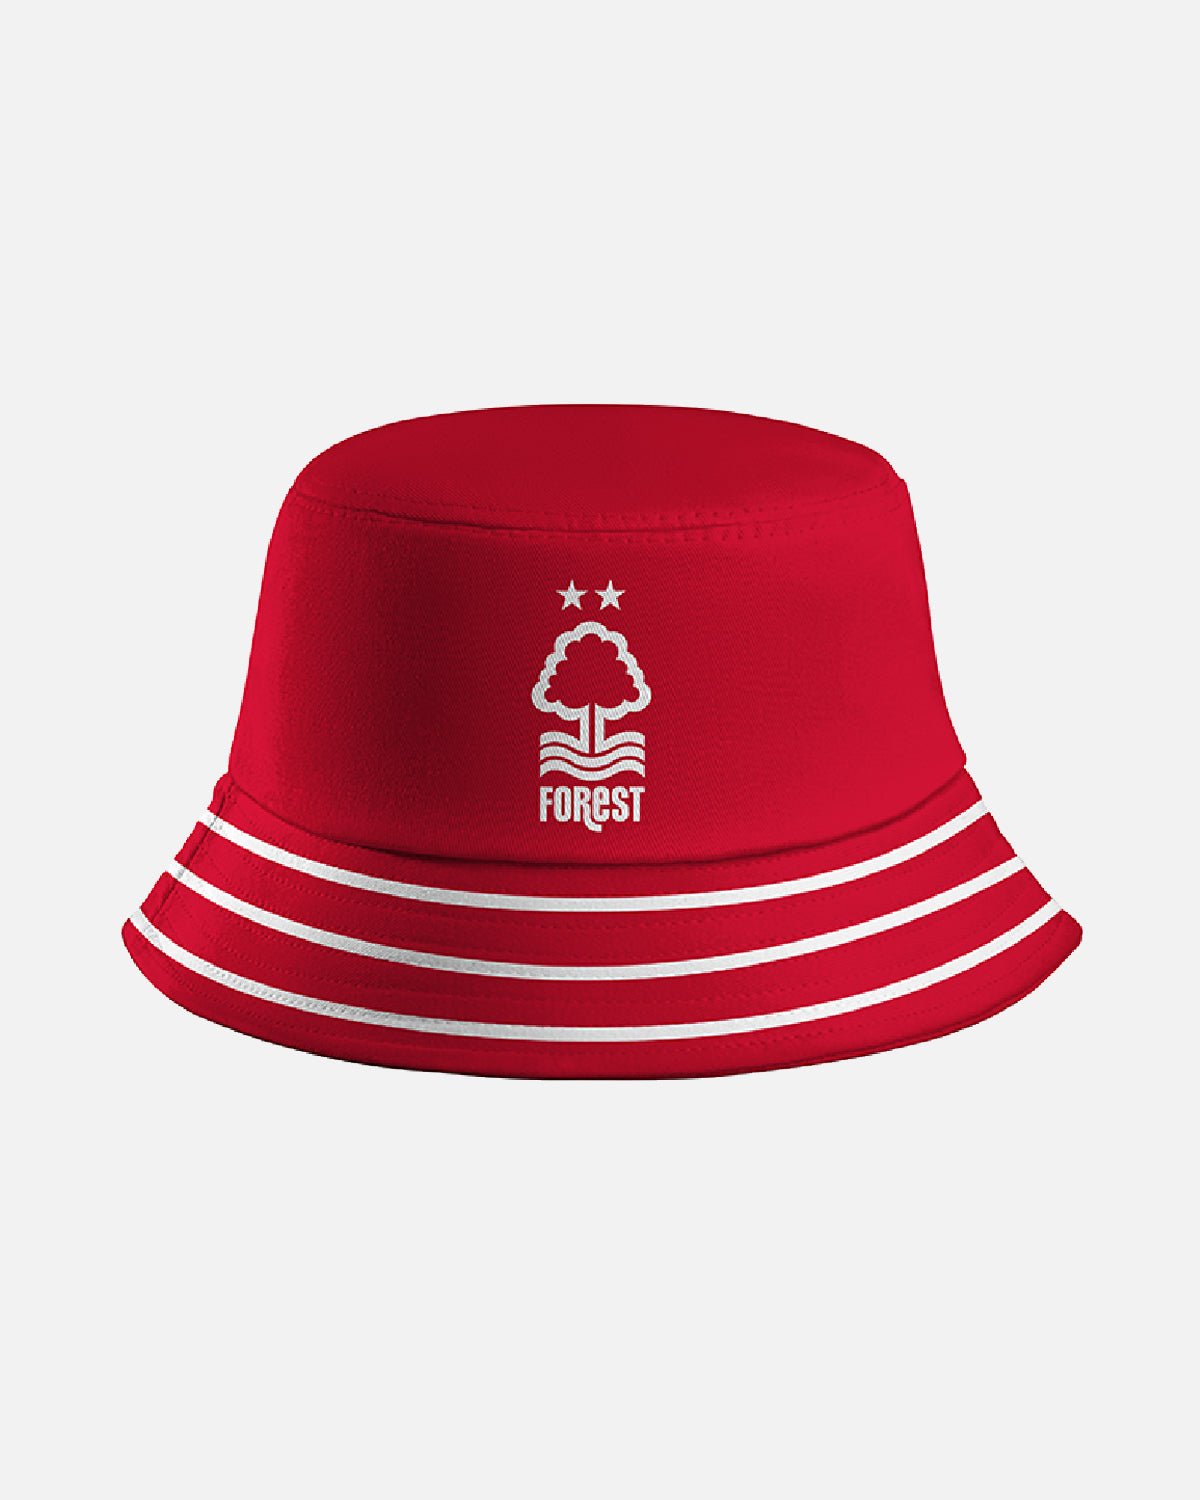 NFFC Red Bucket Hat - Nottingham Forest FC